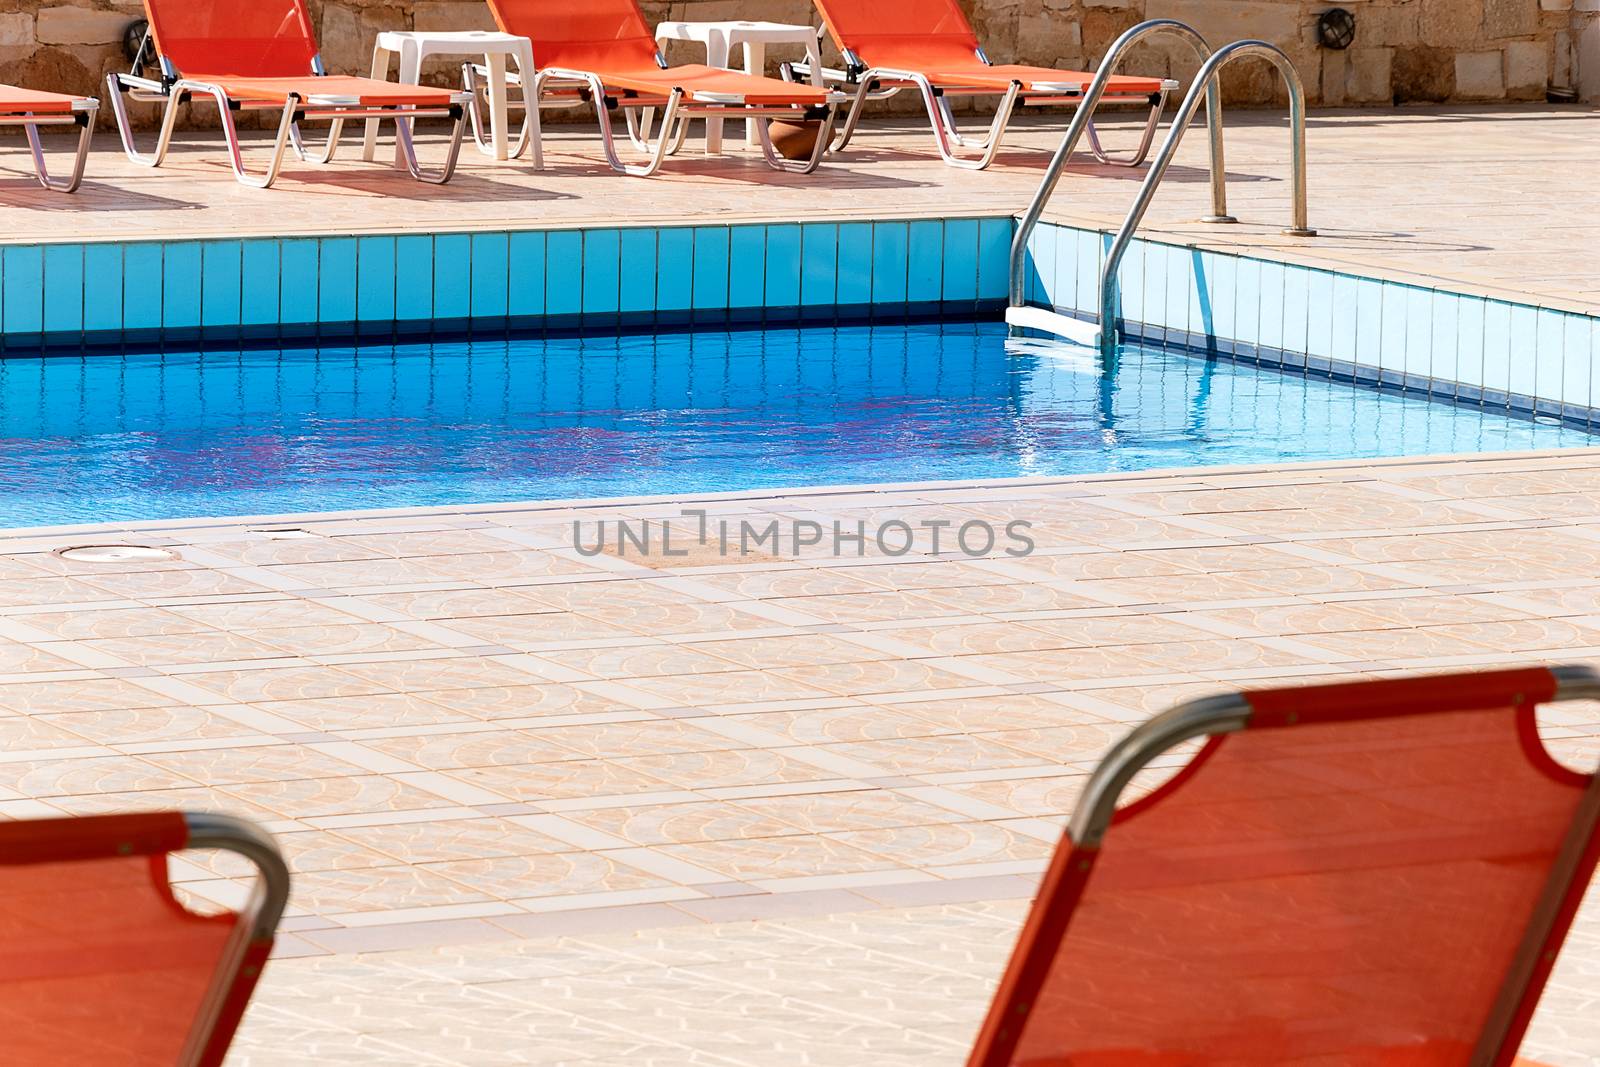 Swimming pool with empty sunbeds outside of vacation hotel. contemporary relax blue water pool  photography.  poolside with ladder and beach chairs in summertime. no people relax resort exterior.